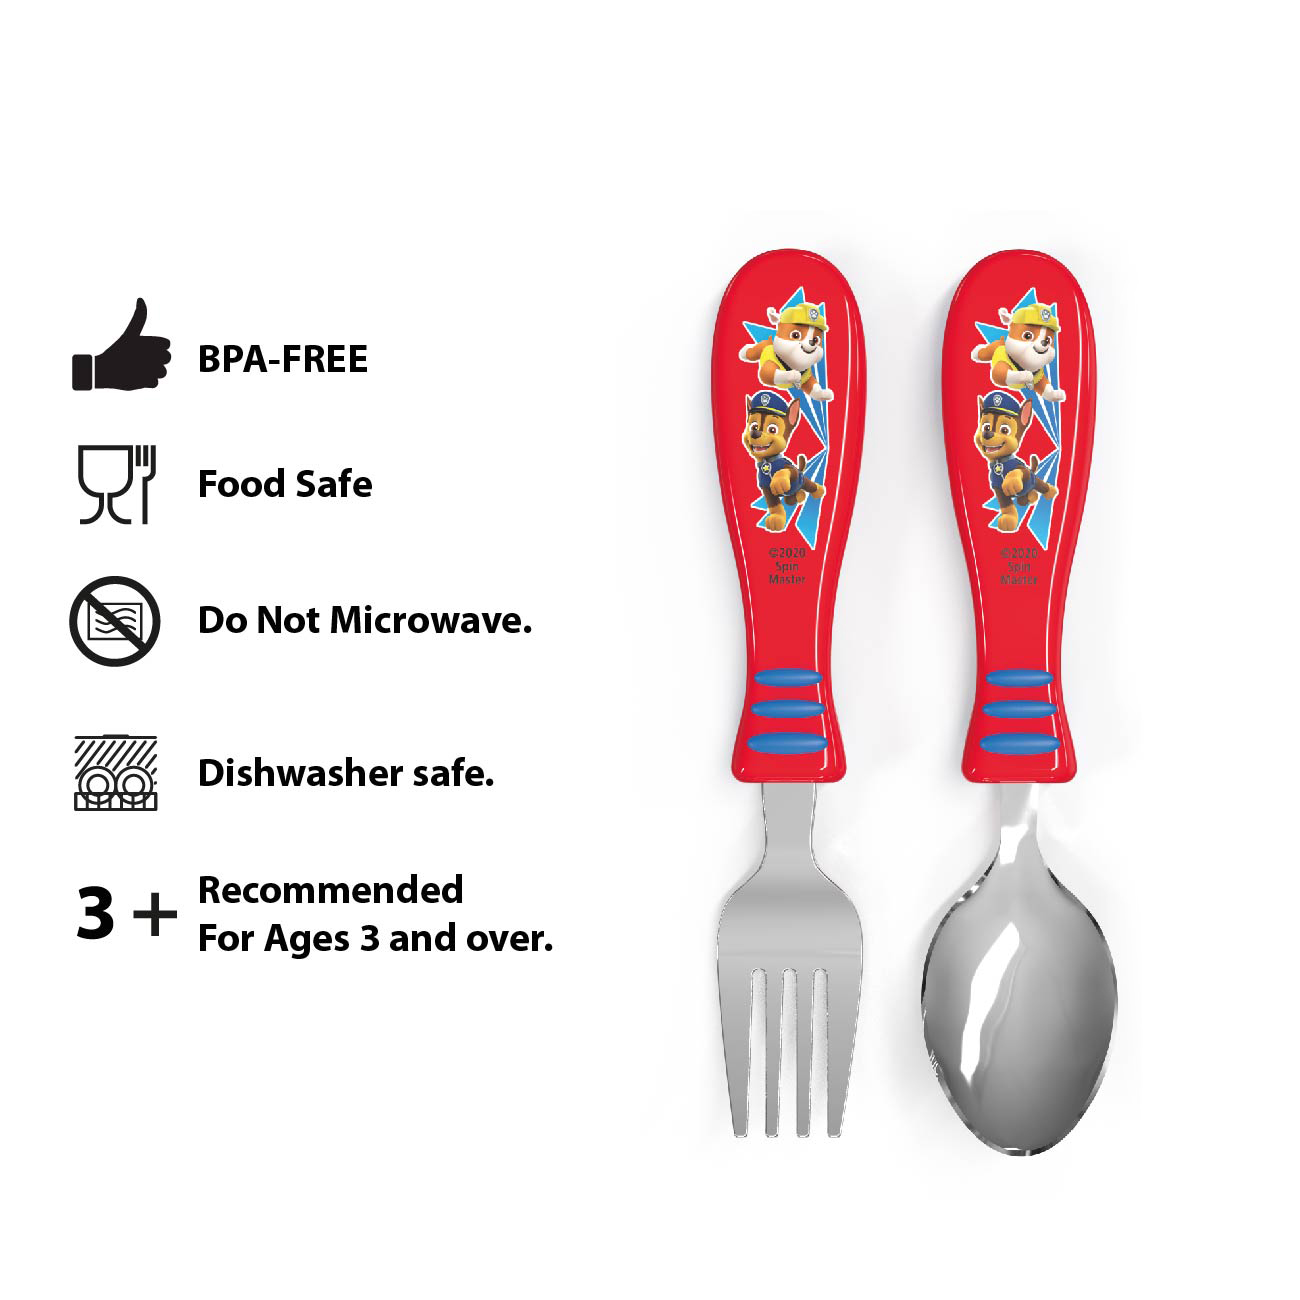 Paw Patrol Kid’s Flatware, Chase and Rubble, 2-piece set slideshow image 7